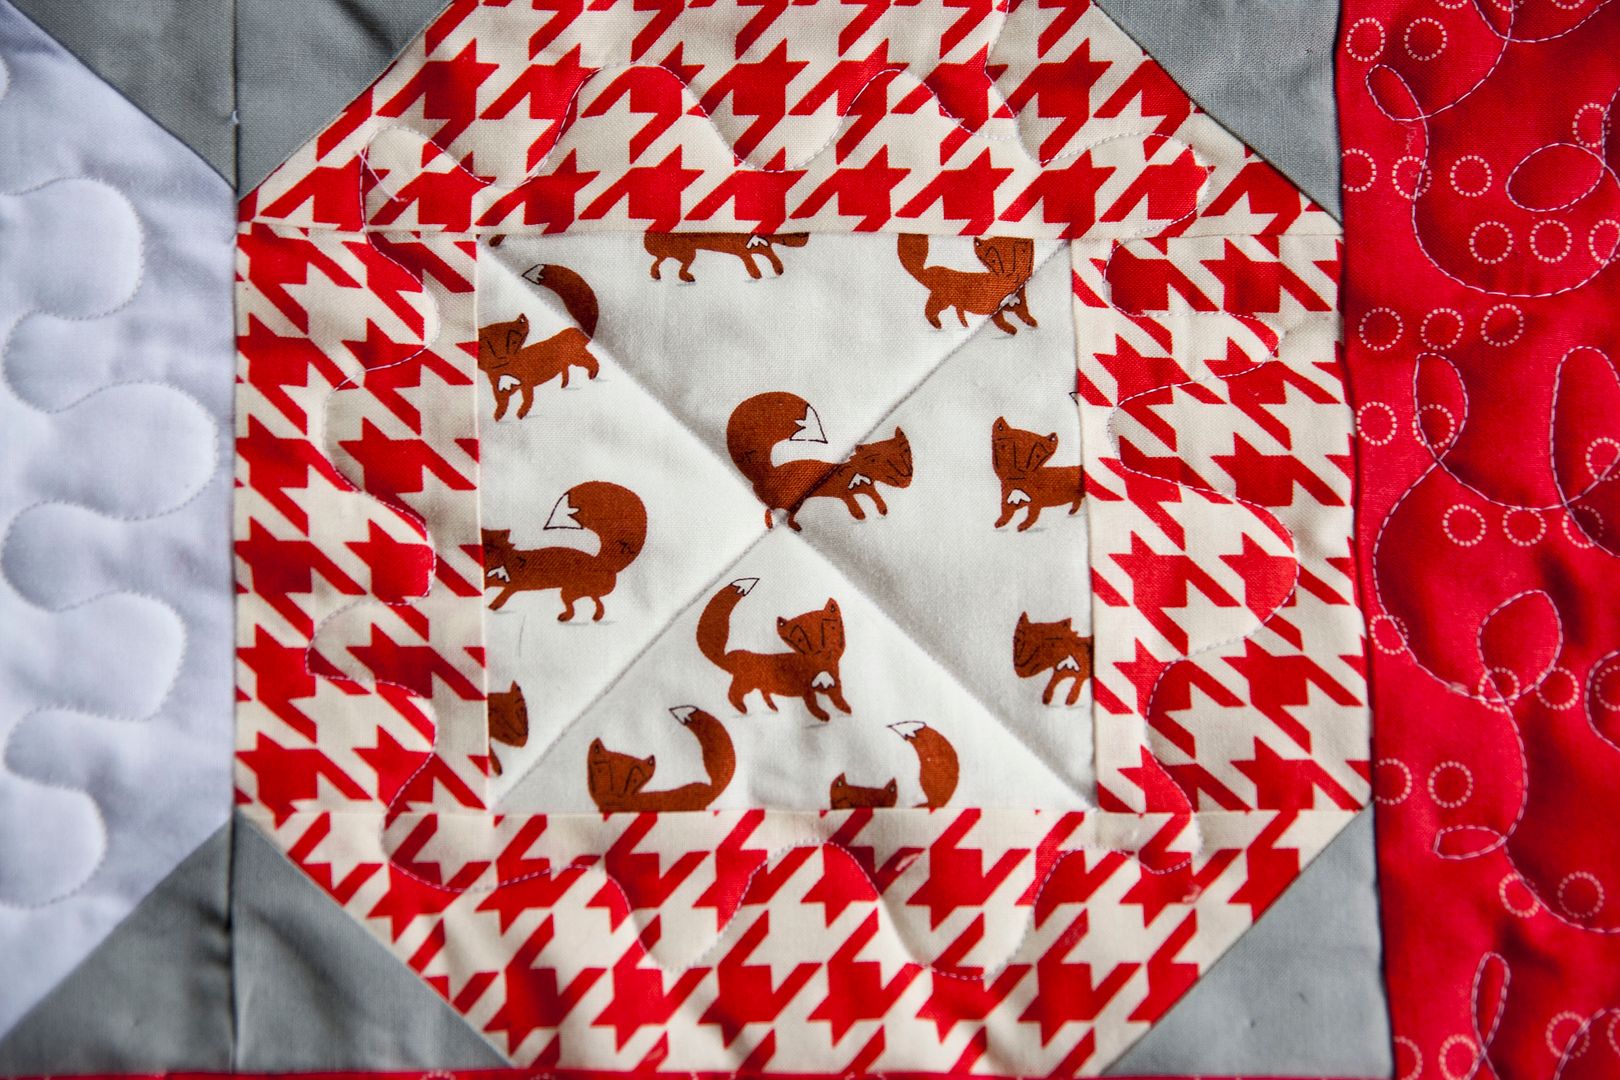 FREE Quilt pattern: Jumping Jacks jelly roll quilt by Vanessa Goertzen of Lella Boutique. Fabric is A Walk in the Woods by Aneela Hoey for Moda.